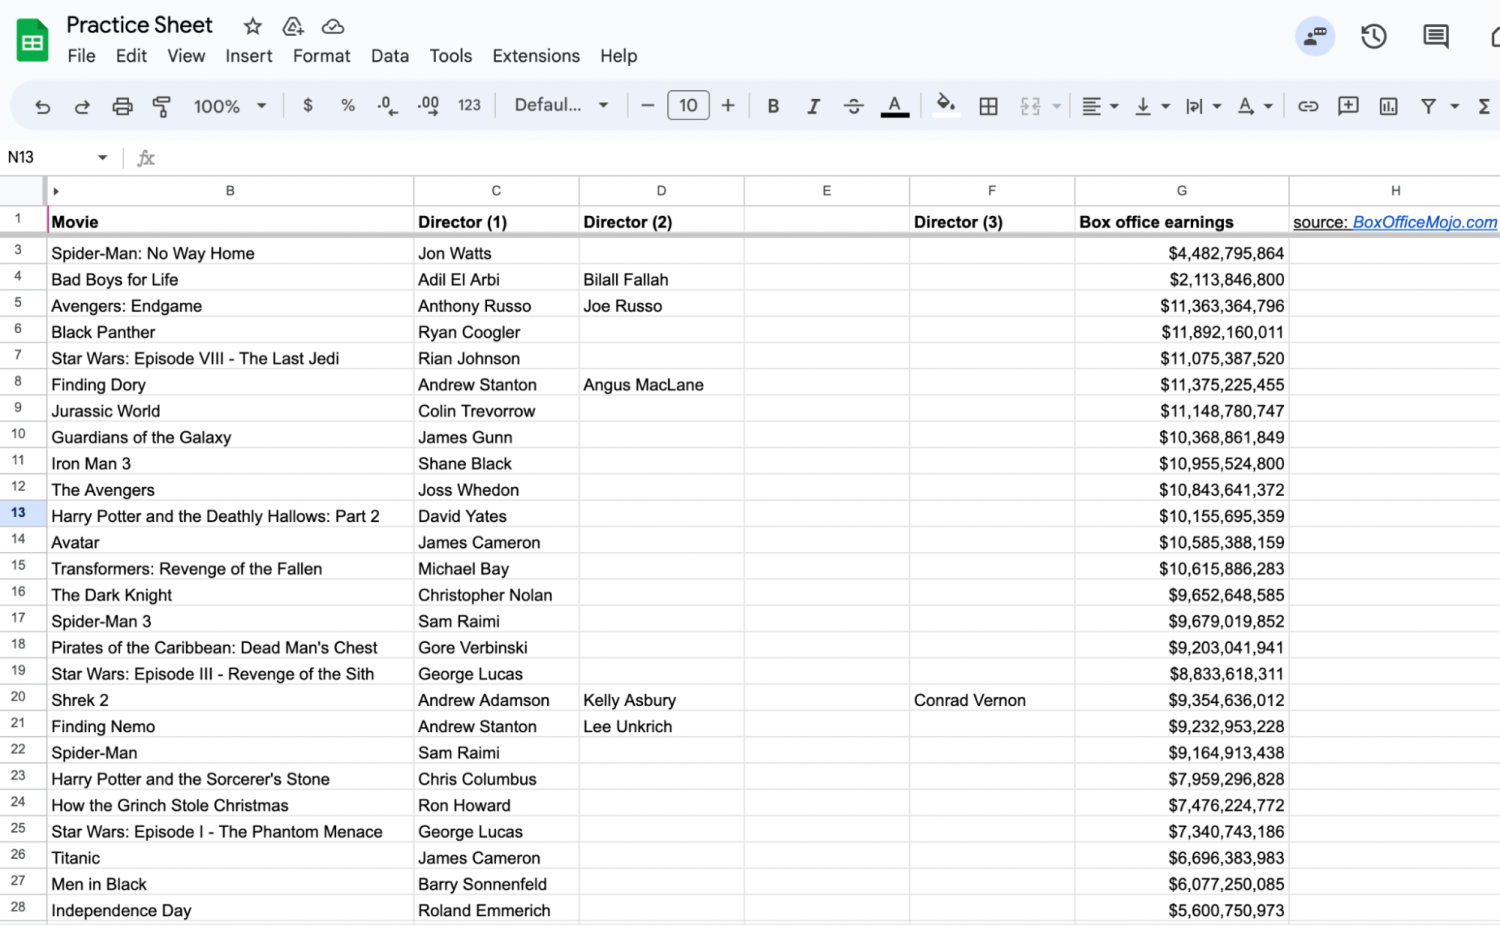 [Screenshot] A Google Sheet shows box office earnings for a list of movies in black text on a white background.